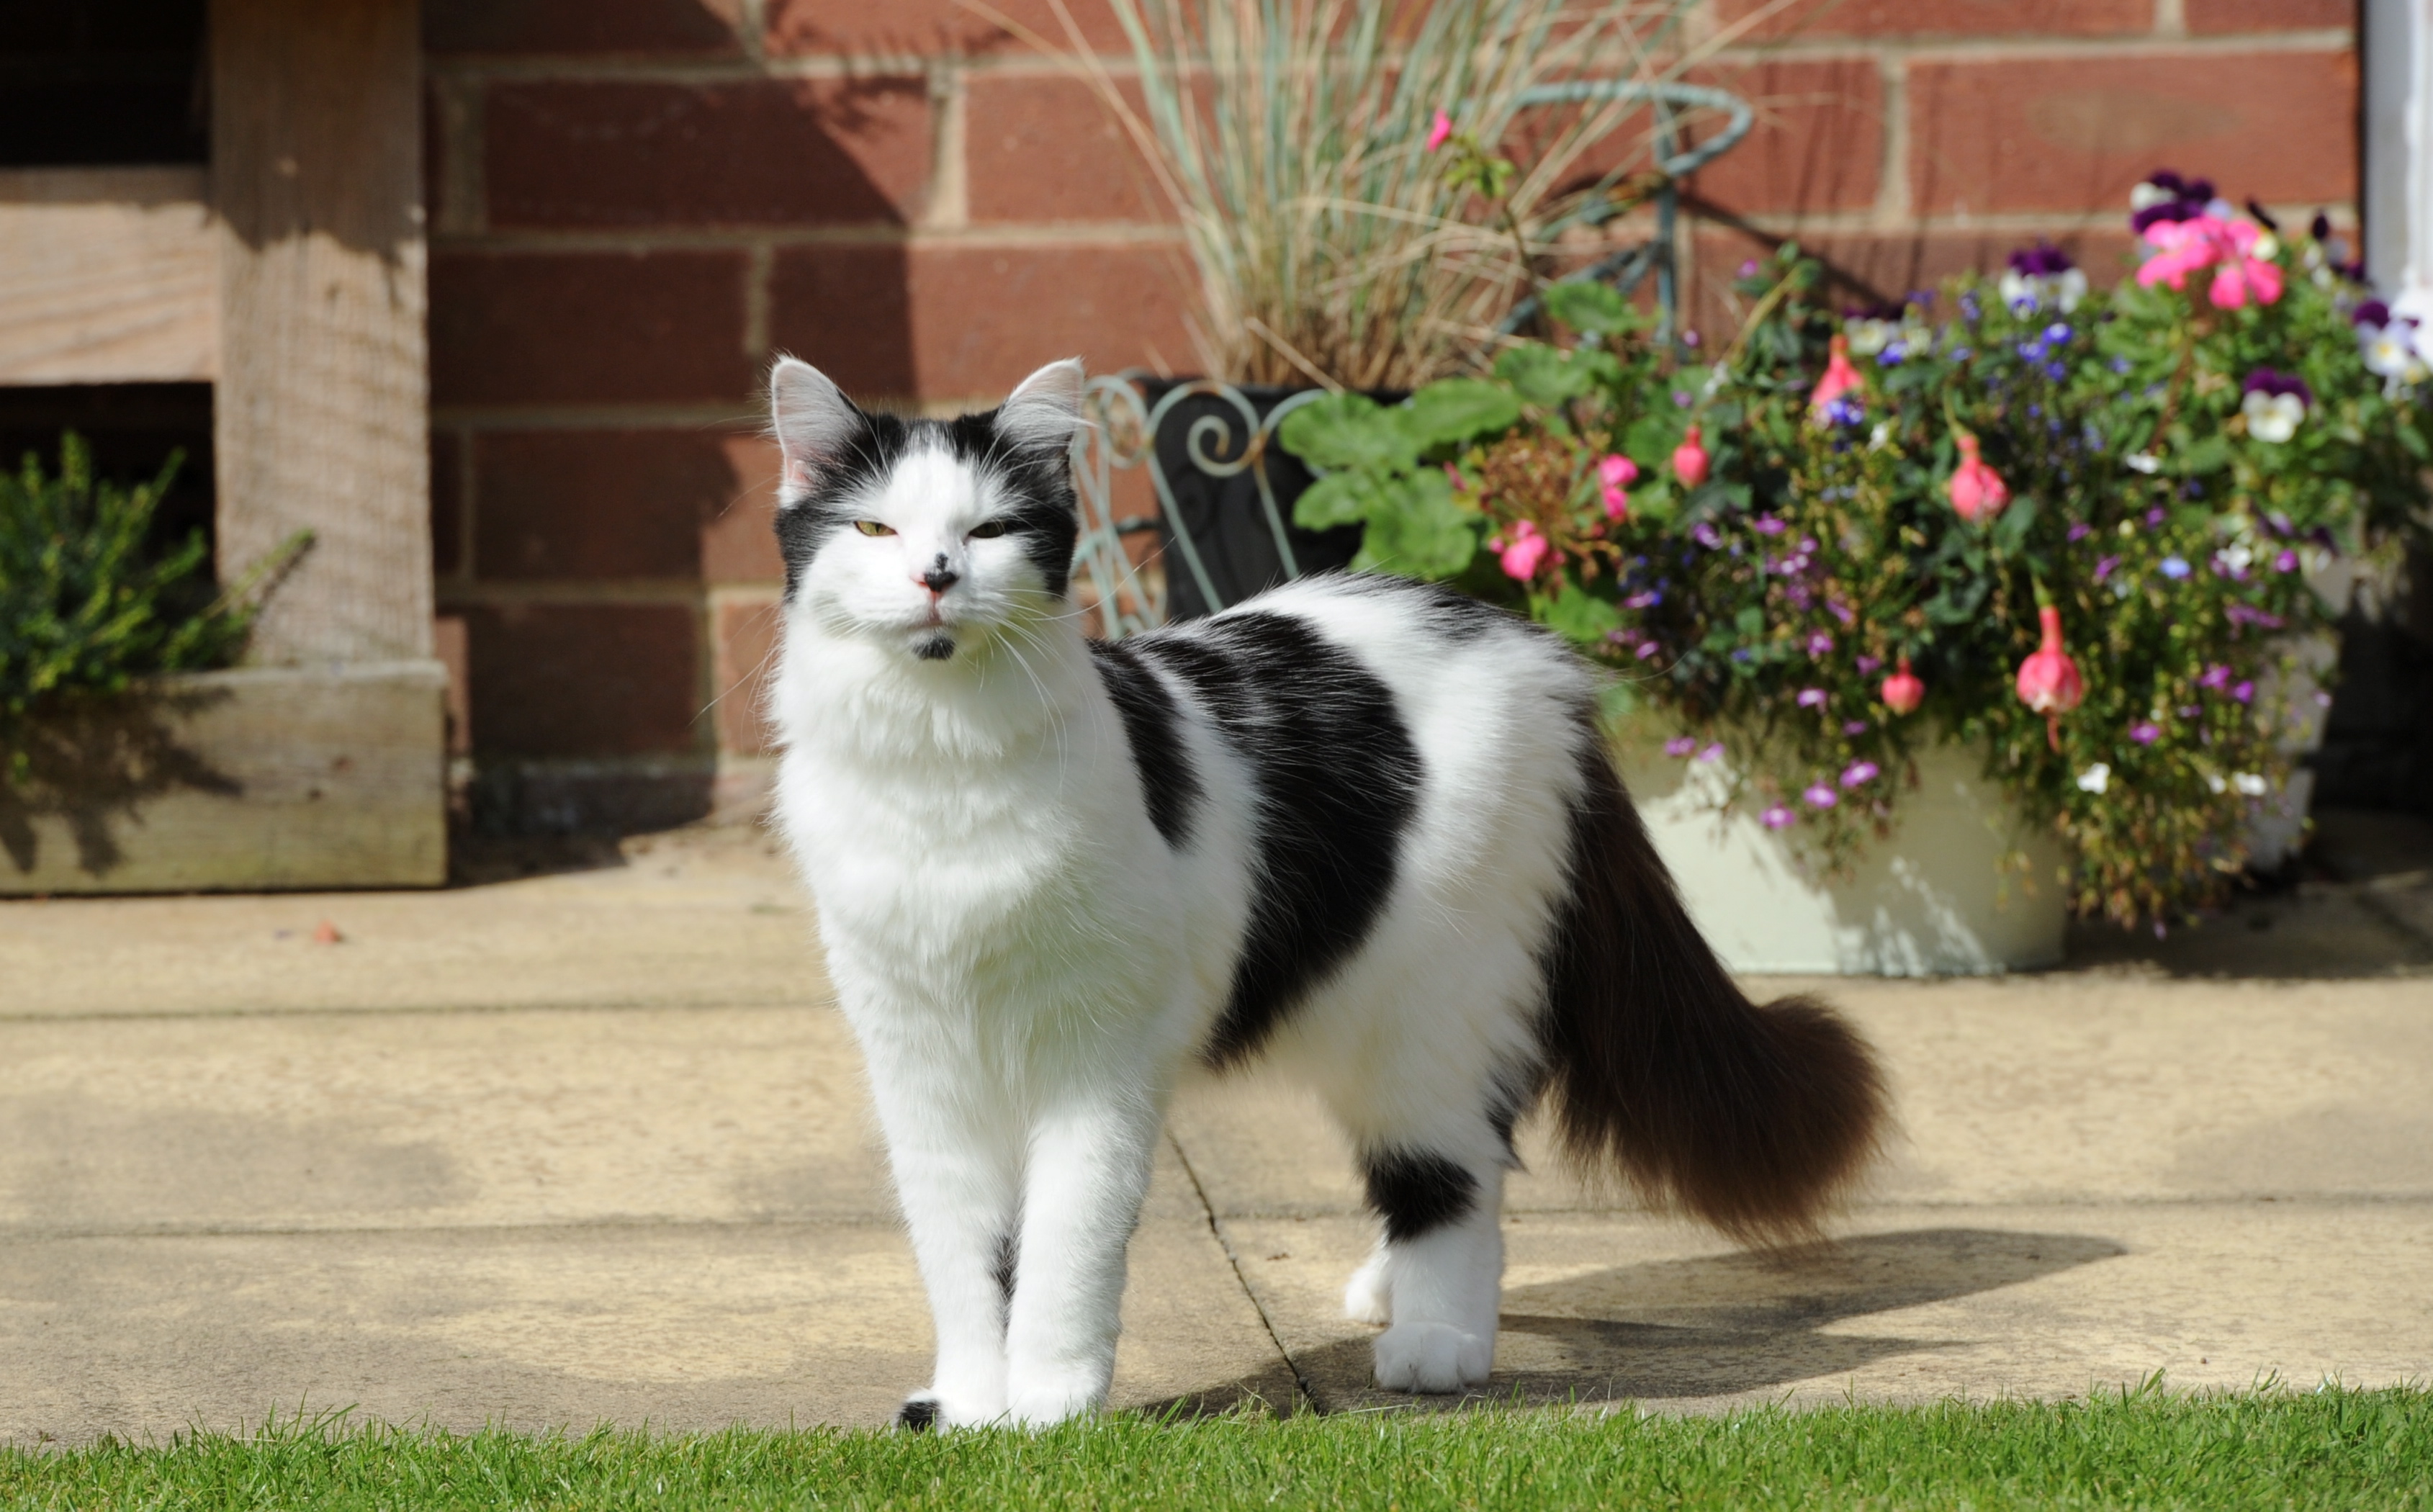 Black and white cat standing next to some potted flowers outside